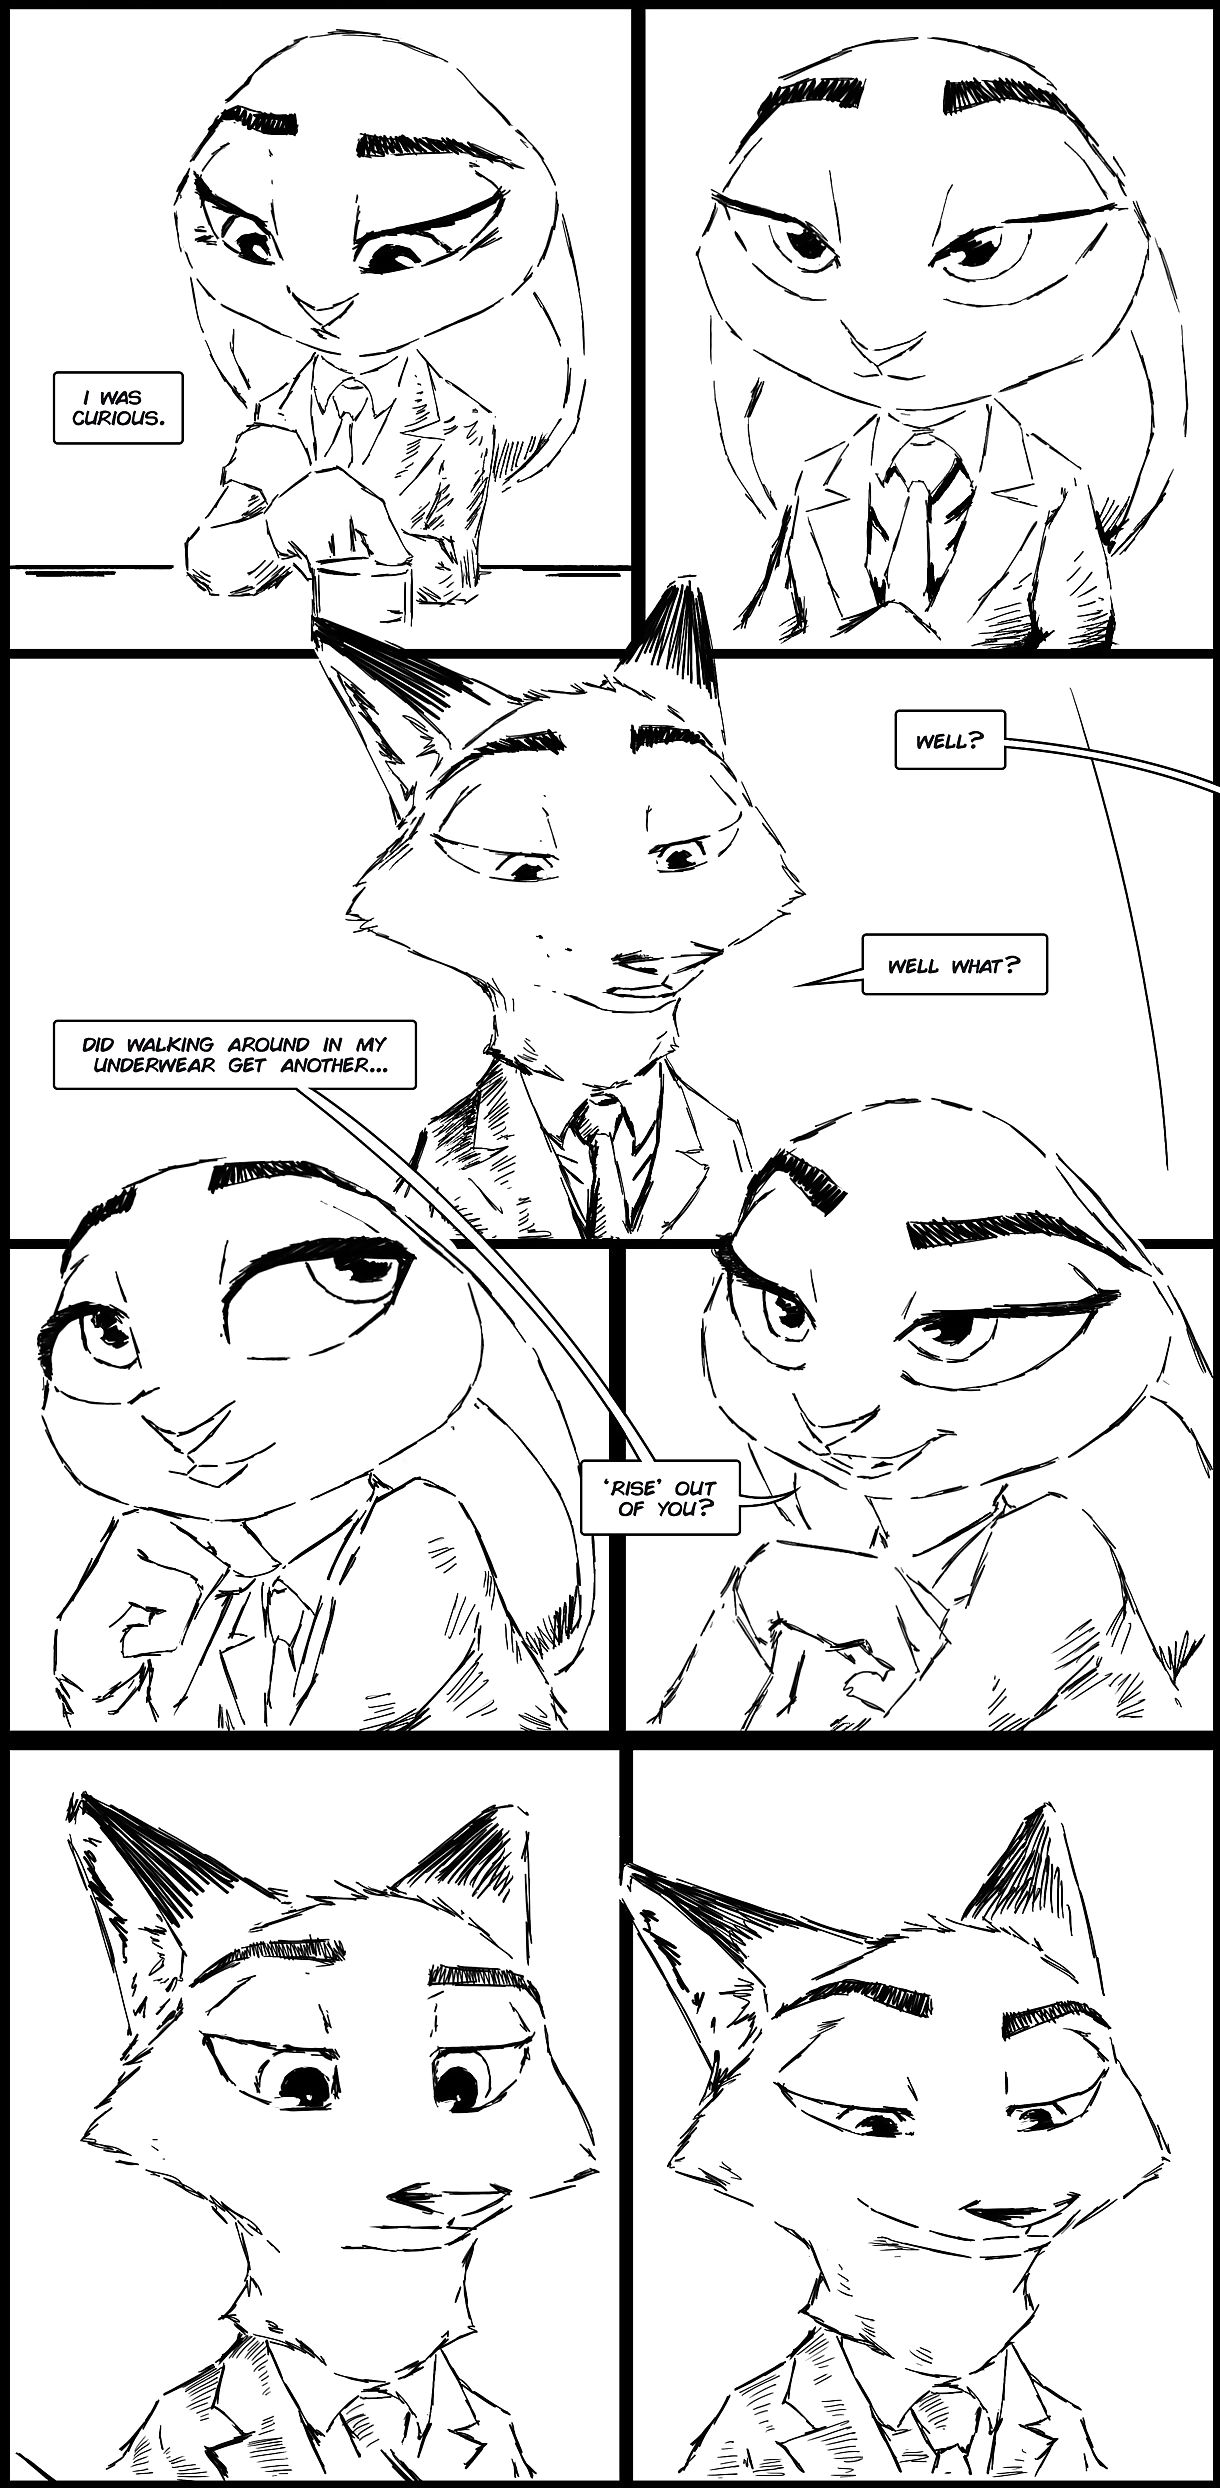 Zootopia Sunderance Ongoing UPDATED - part 12